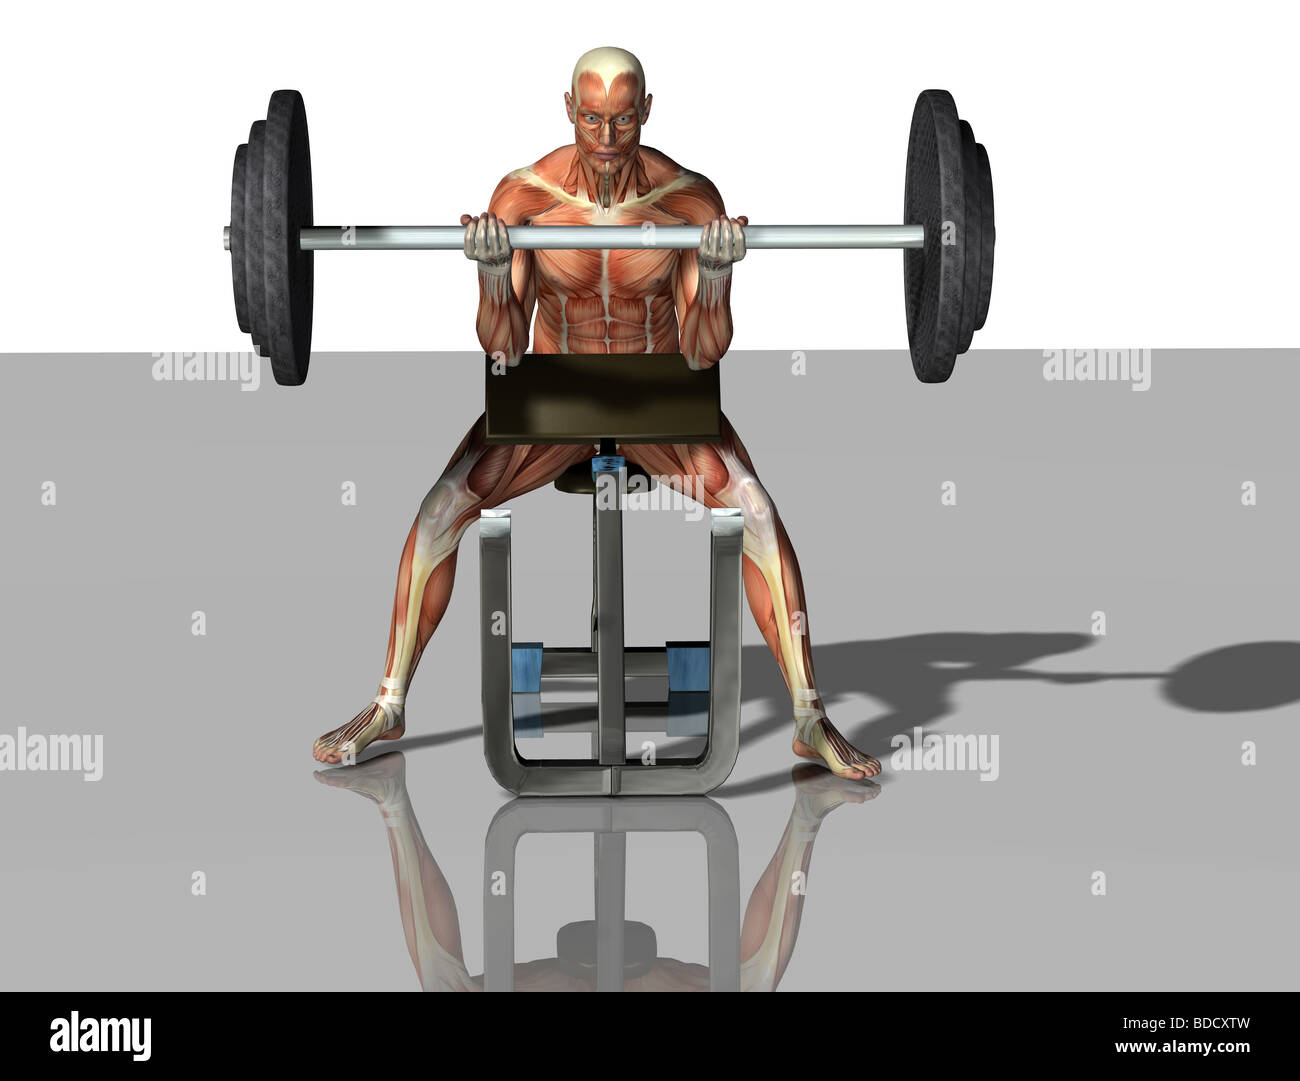 Muscolo uomo come weightlifter Foto Stock